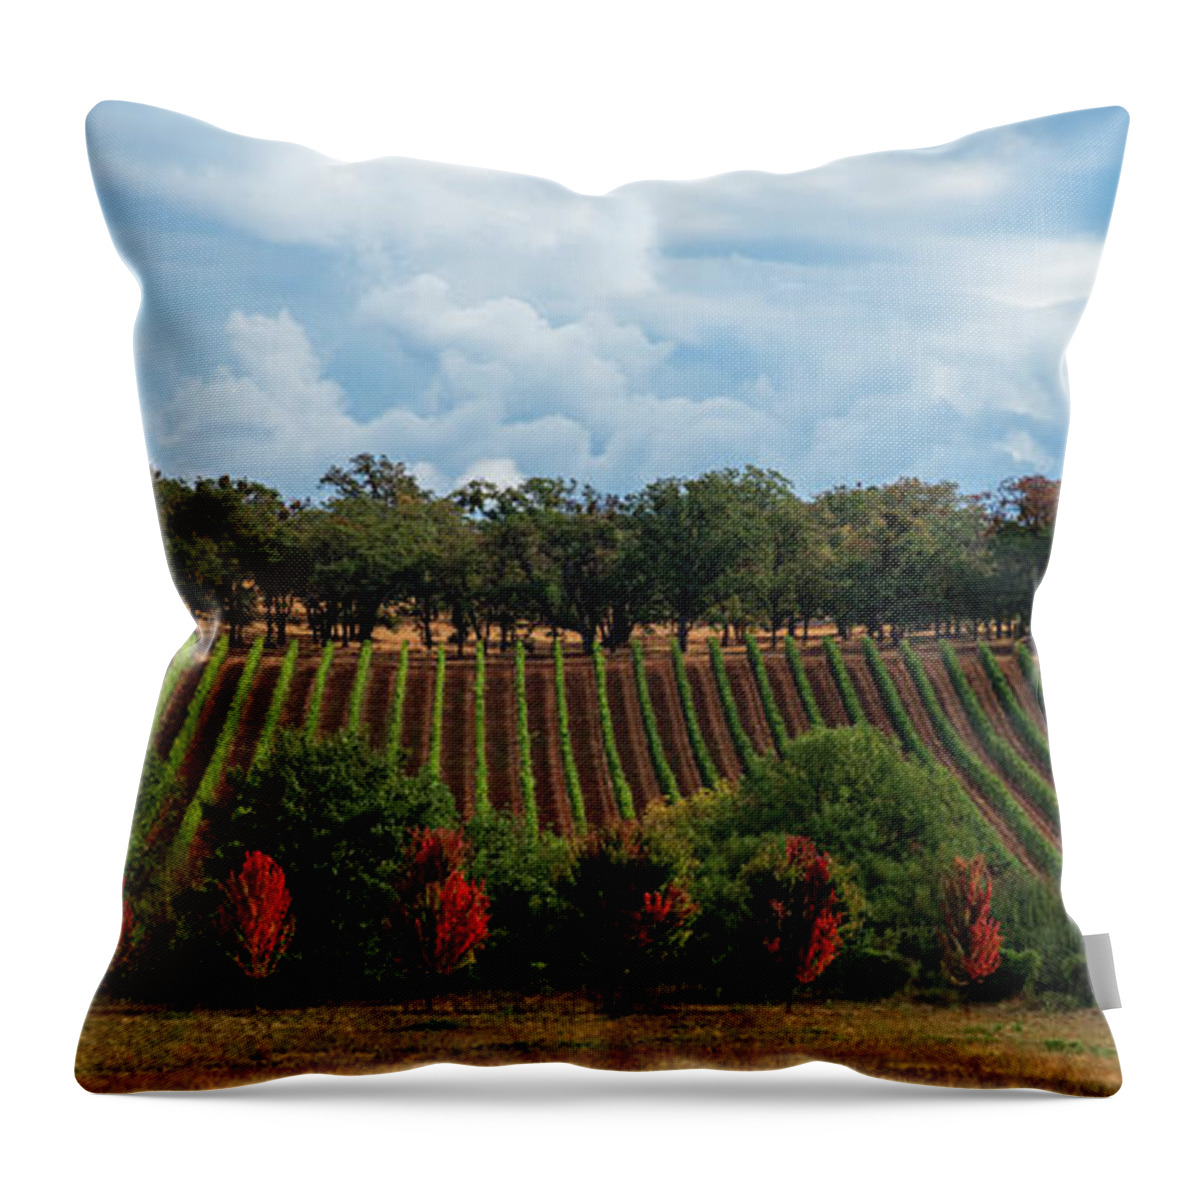 Vineyard Throw Pillow featuring the photograph Autumn Vines by Dan McGeorge